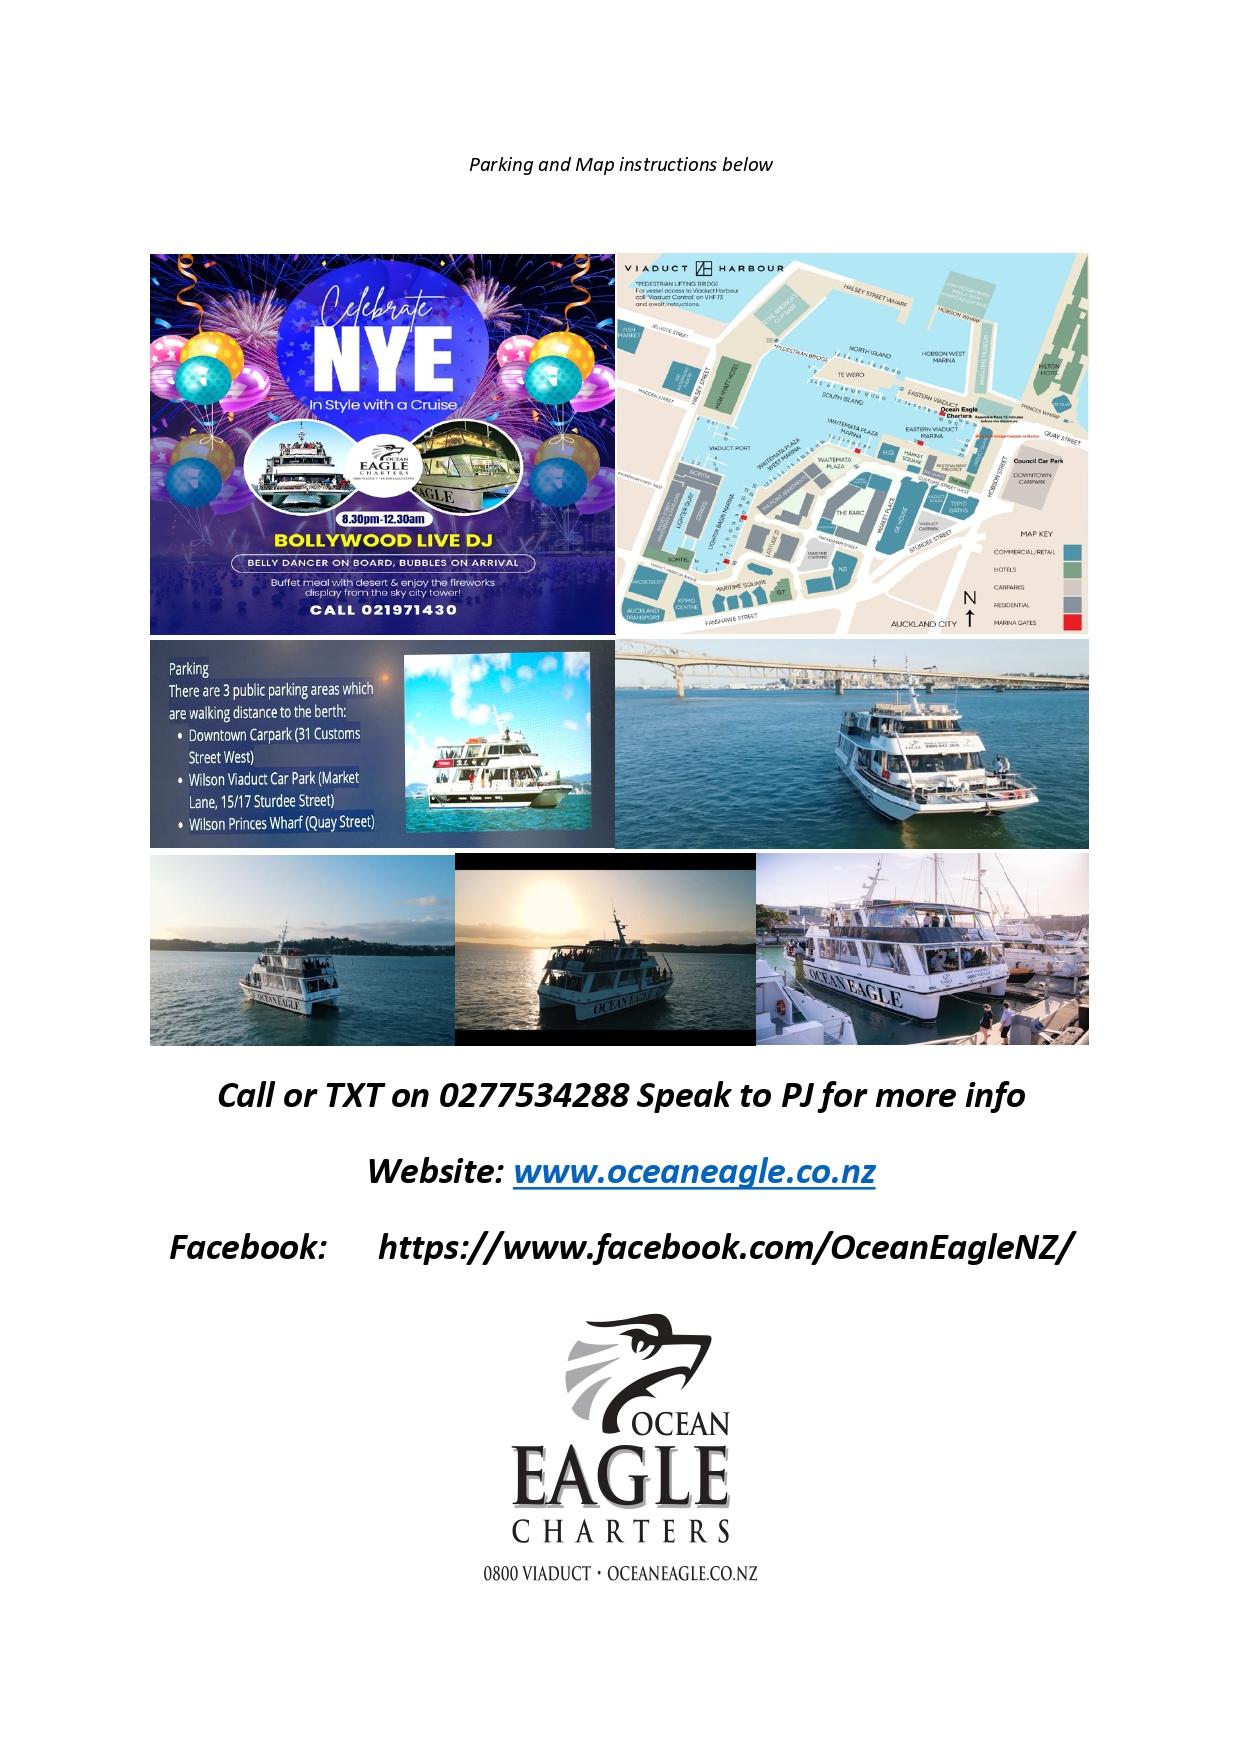 NYE Party on the Cruise Boat